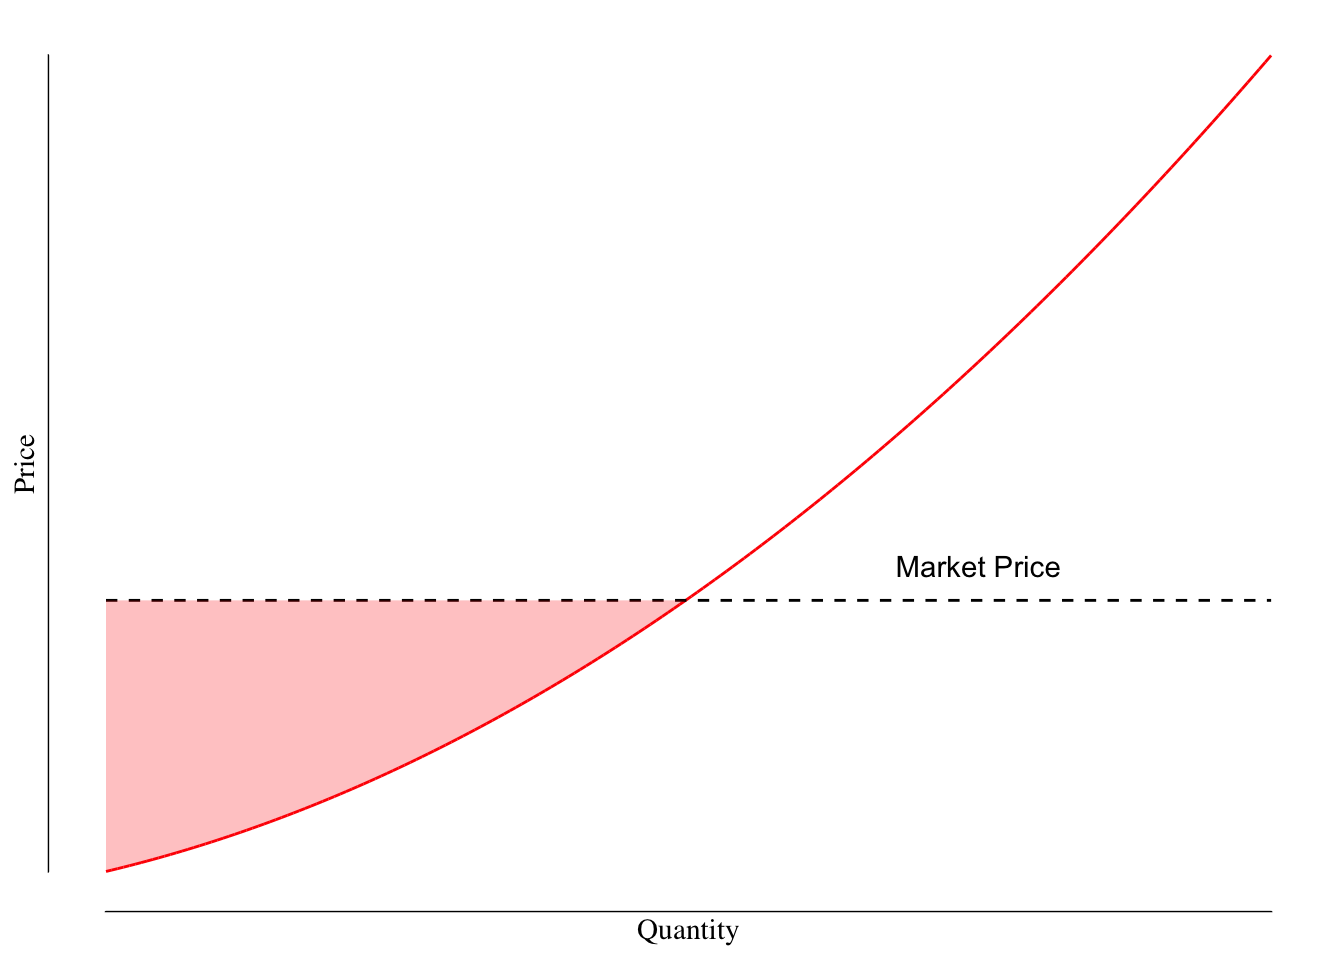 Supply Curve, Market Price, and Producer Surplus. The supply curve is shown in red and is upward sloping while the market price, or the price paid by the consumer, is flat (dashed black line). The difference between these two lines is the producer surplus. We repersent that as the area shaded red.